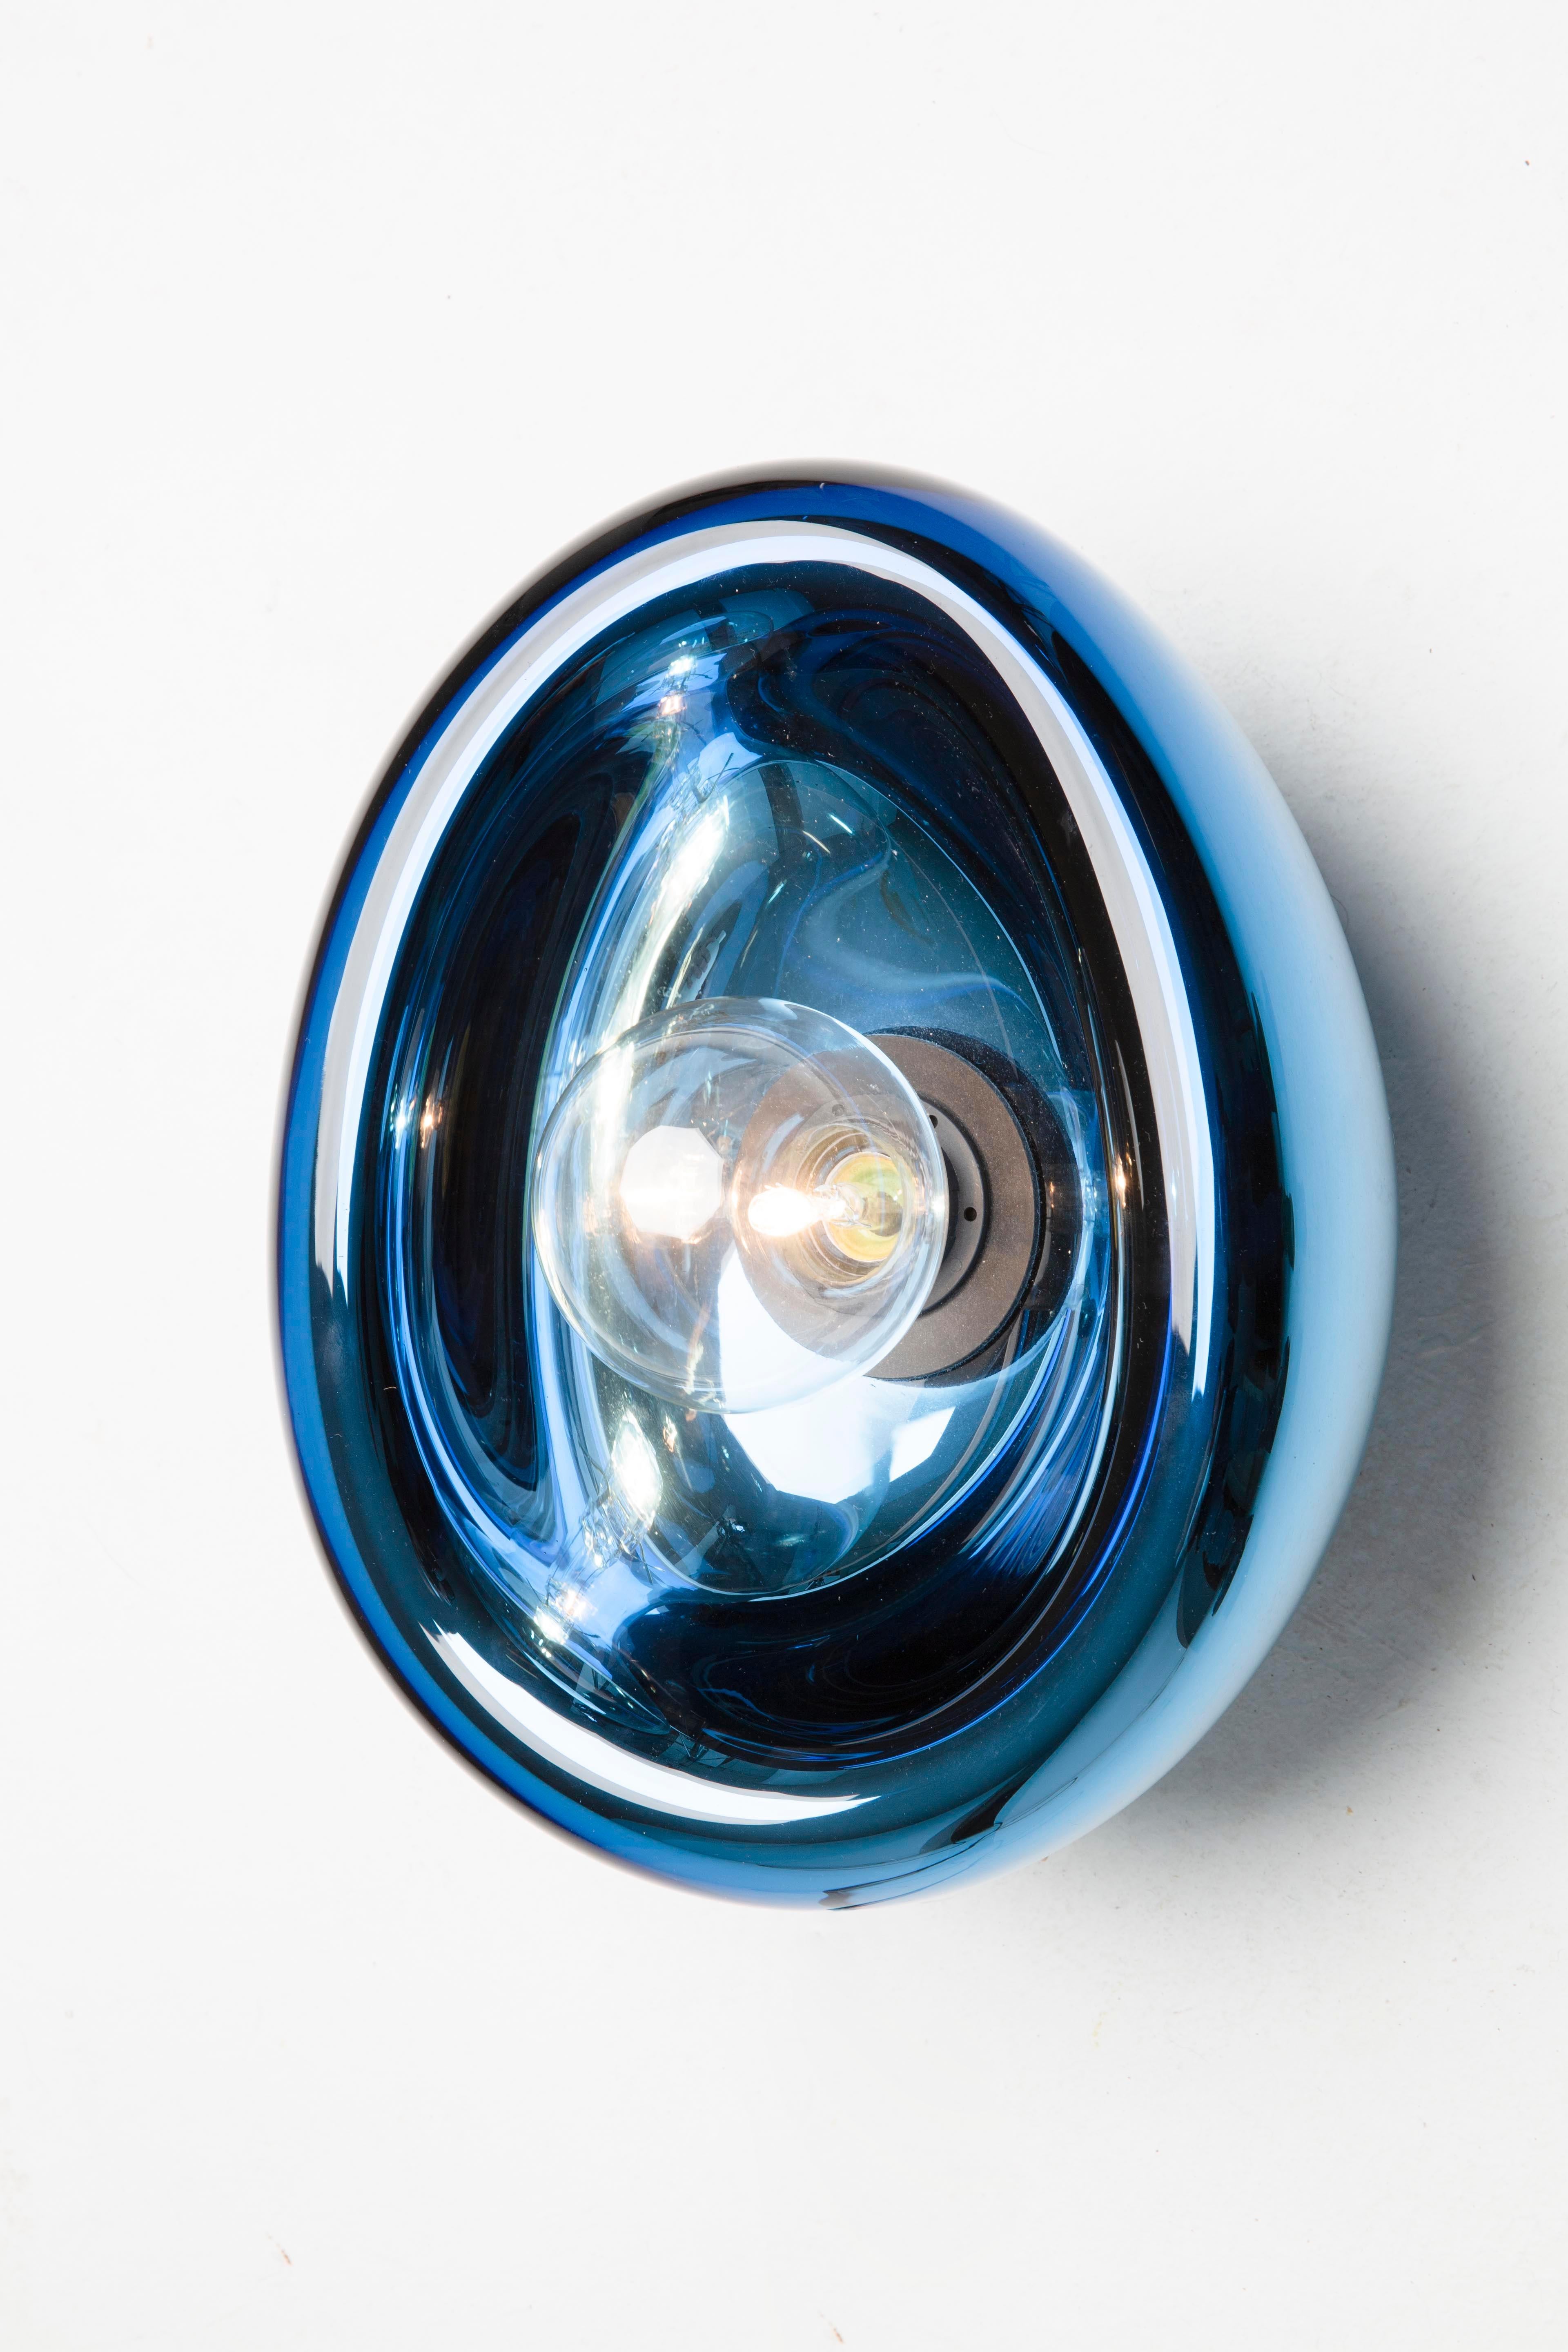 Small aurum blue glass sconces by Alex de Witte
Dimensions: D 20 x H 30 cm
Materials: Mouth blown glass
It can be purchased as an ensemble or individual, in different dimensions and colors.


Aurum shows how Alex de Witte is able to convey